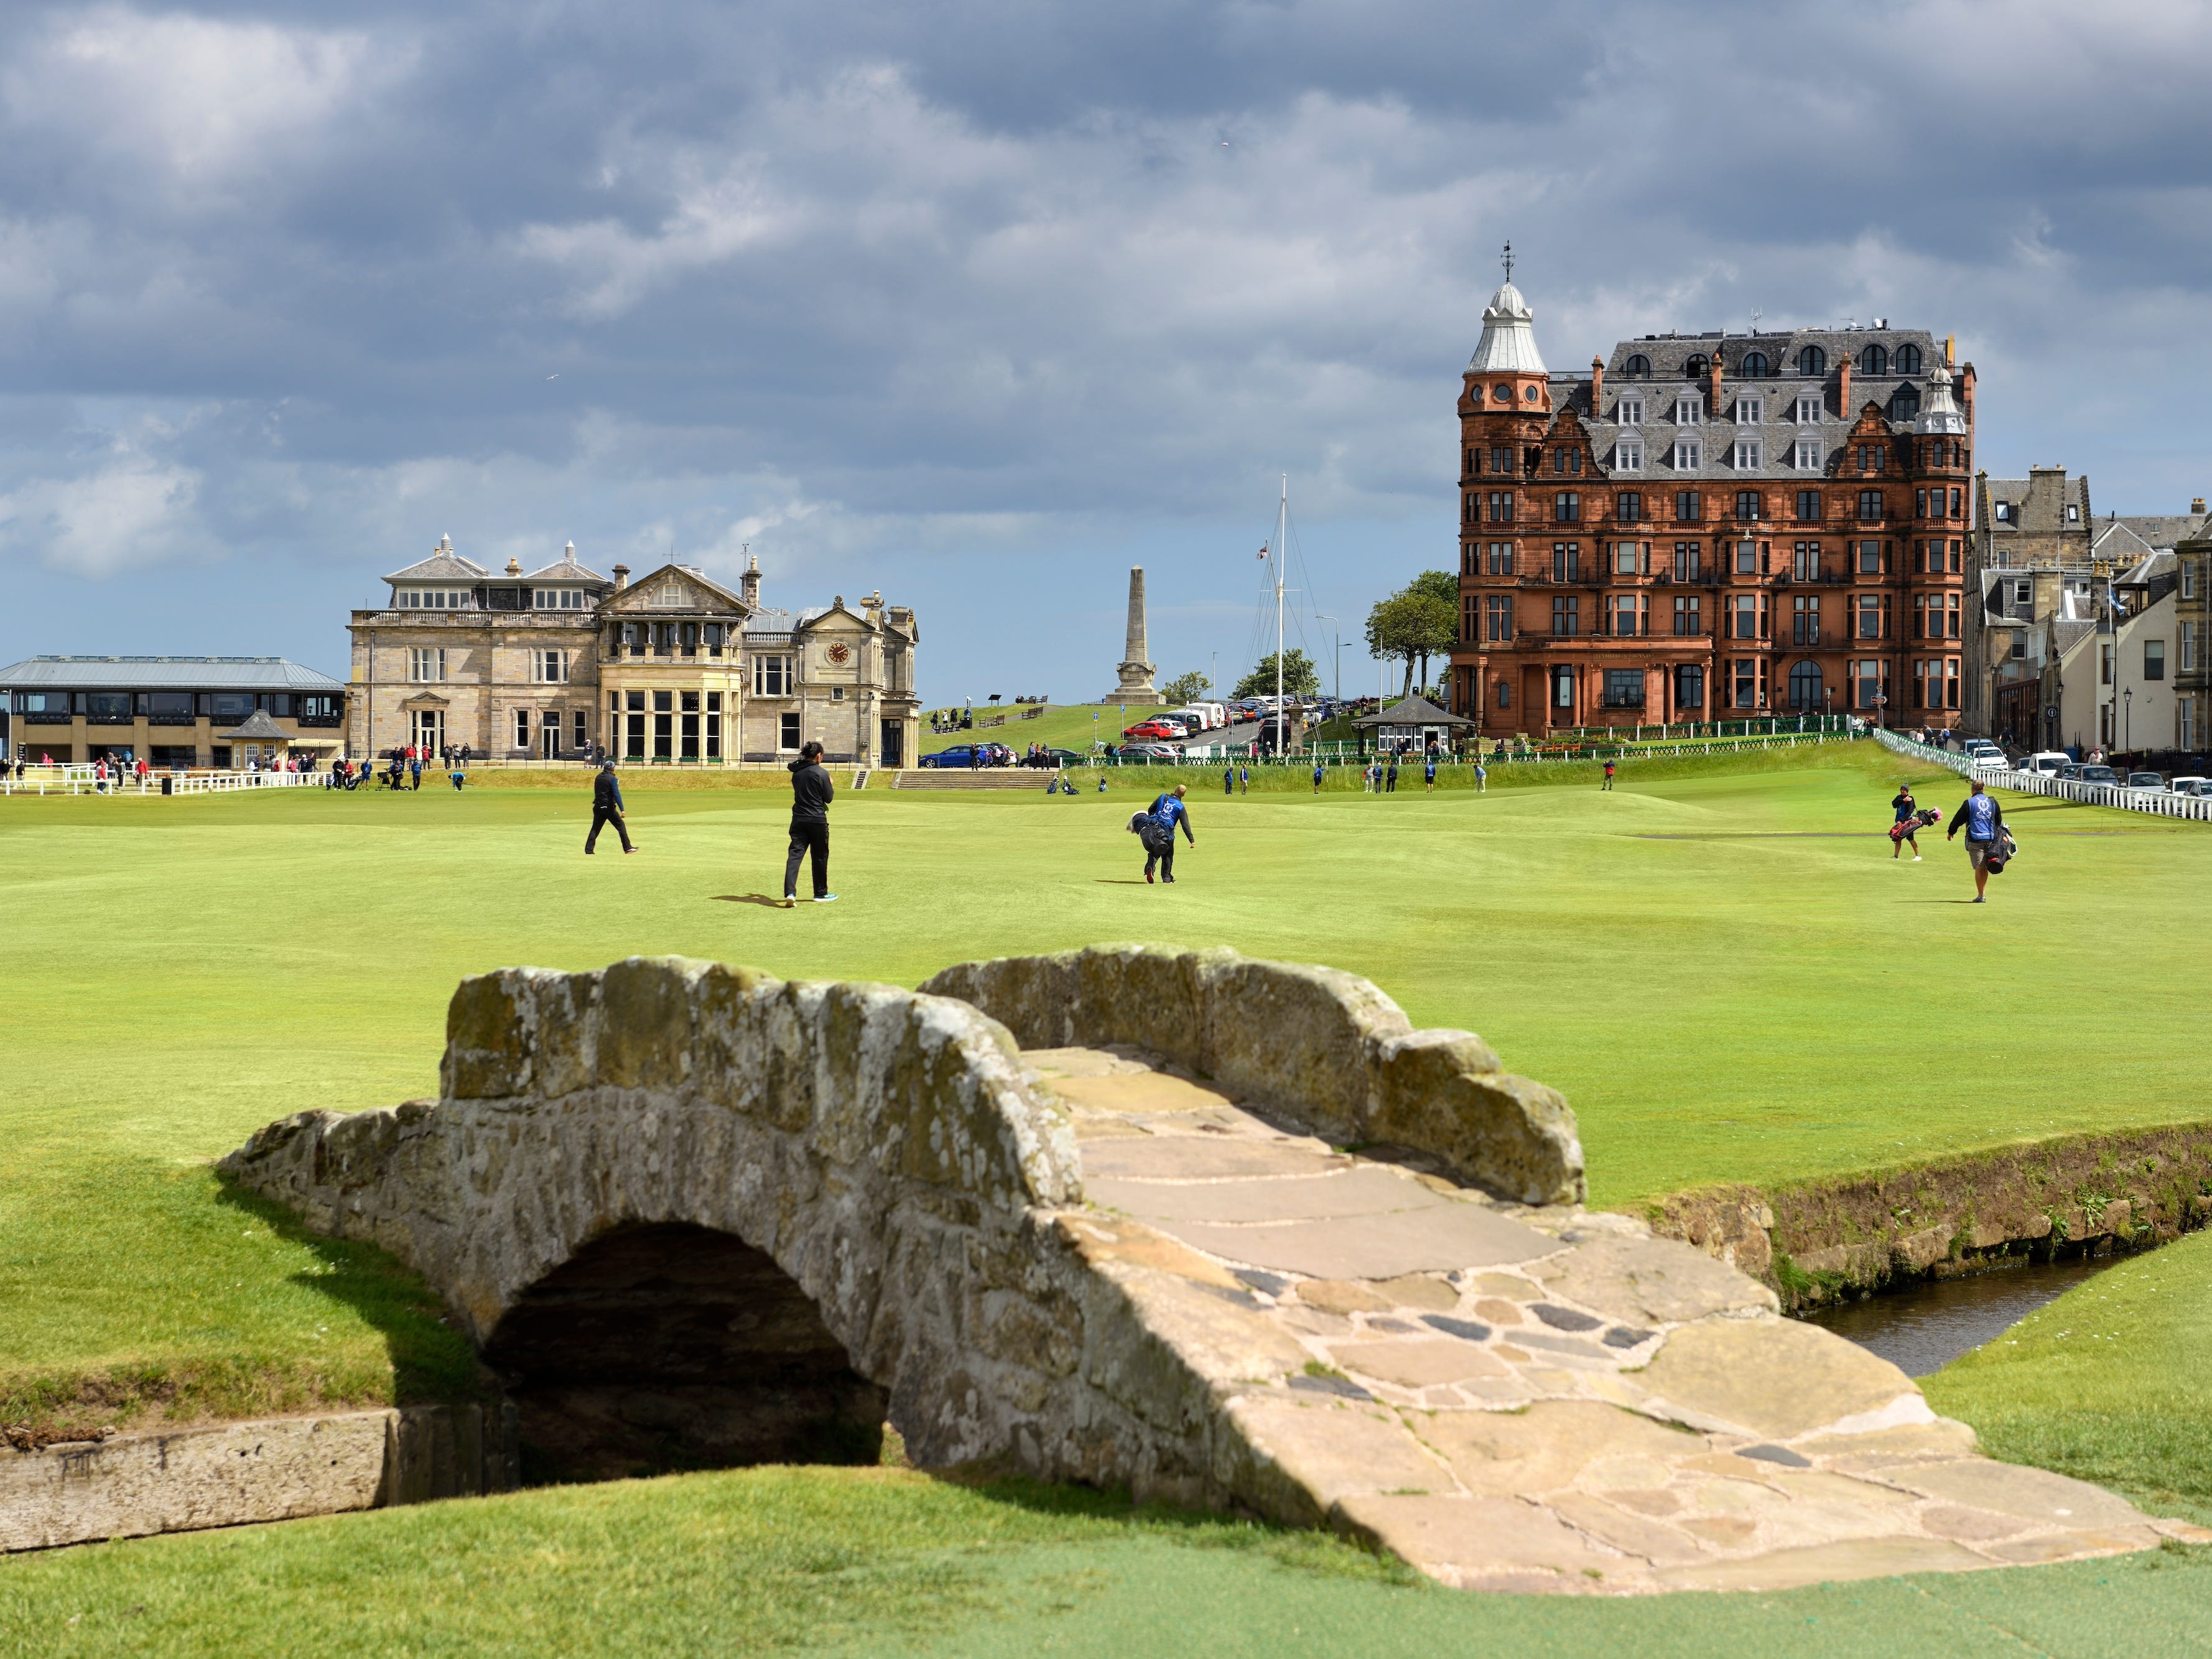 <p>Founded in 1754, The Old Course at <a href="https://www.businessinsider.com/scotland-most-expensive-apartment-st-andrews-butler-chef-photos-2023-8">St. Andrews</a> in Fife, Scotland, is one of the oldest golf courses in the world and home to The Open Championship, the oldest and one of the most prestigious tournaments of the season.</p><p>While you can take a walking tour of the course between March and November, the clubhouse is usually only accessible to its 2,500 members. However, once a year on November 30, which is also known as St. Andrews Day, part of it is opened to the public for tours, Golf Digest reported.</p><p>St. Andrews is notoriously exclusive, allowing its first female members in 2015. Golf.com reported that the multi-step membership process includes an invitation from a current member, an application, and letters of recommendation — and this doesn't even guarantee admission, as it can take years to get through the waitlist, and applications can be outright denied.</p>